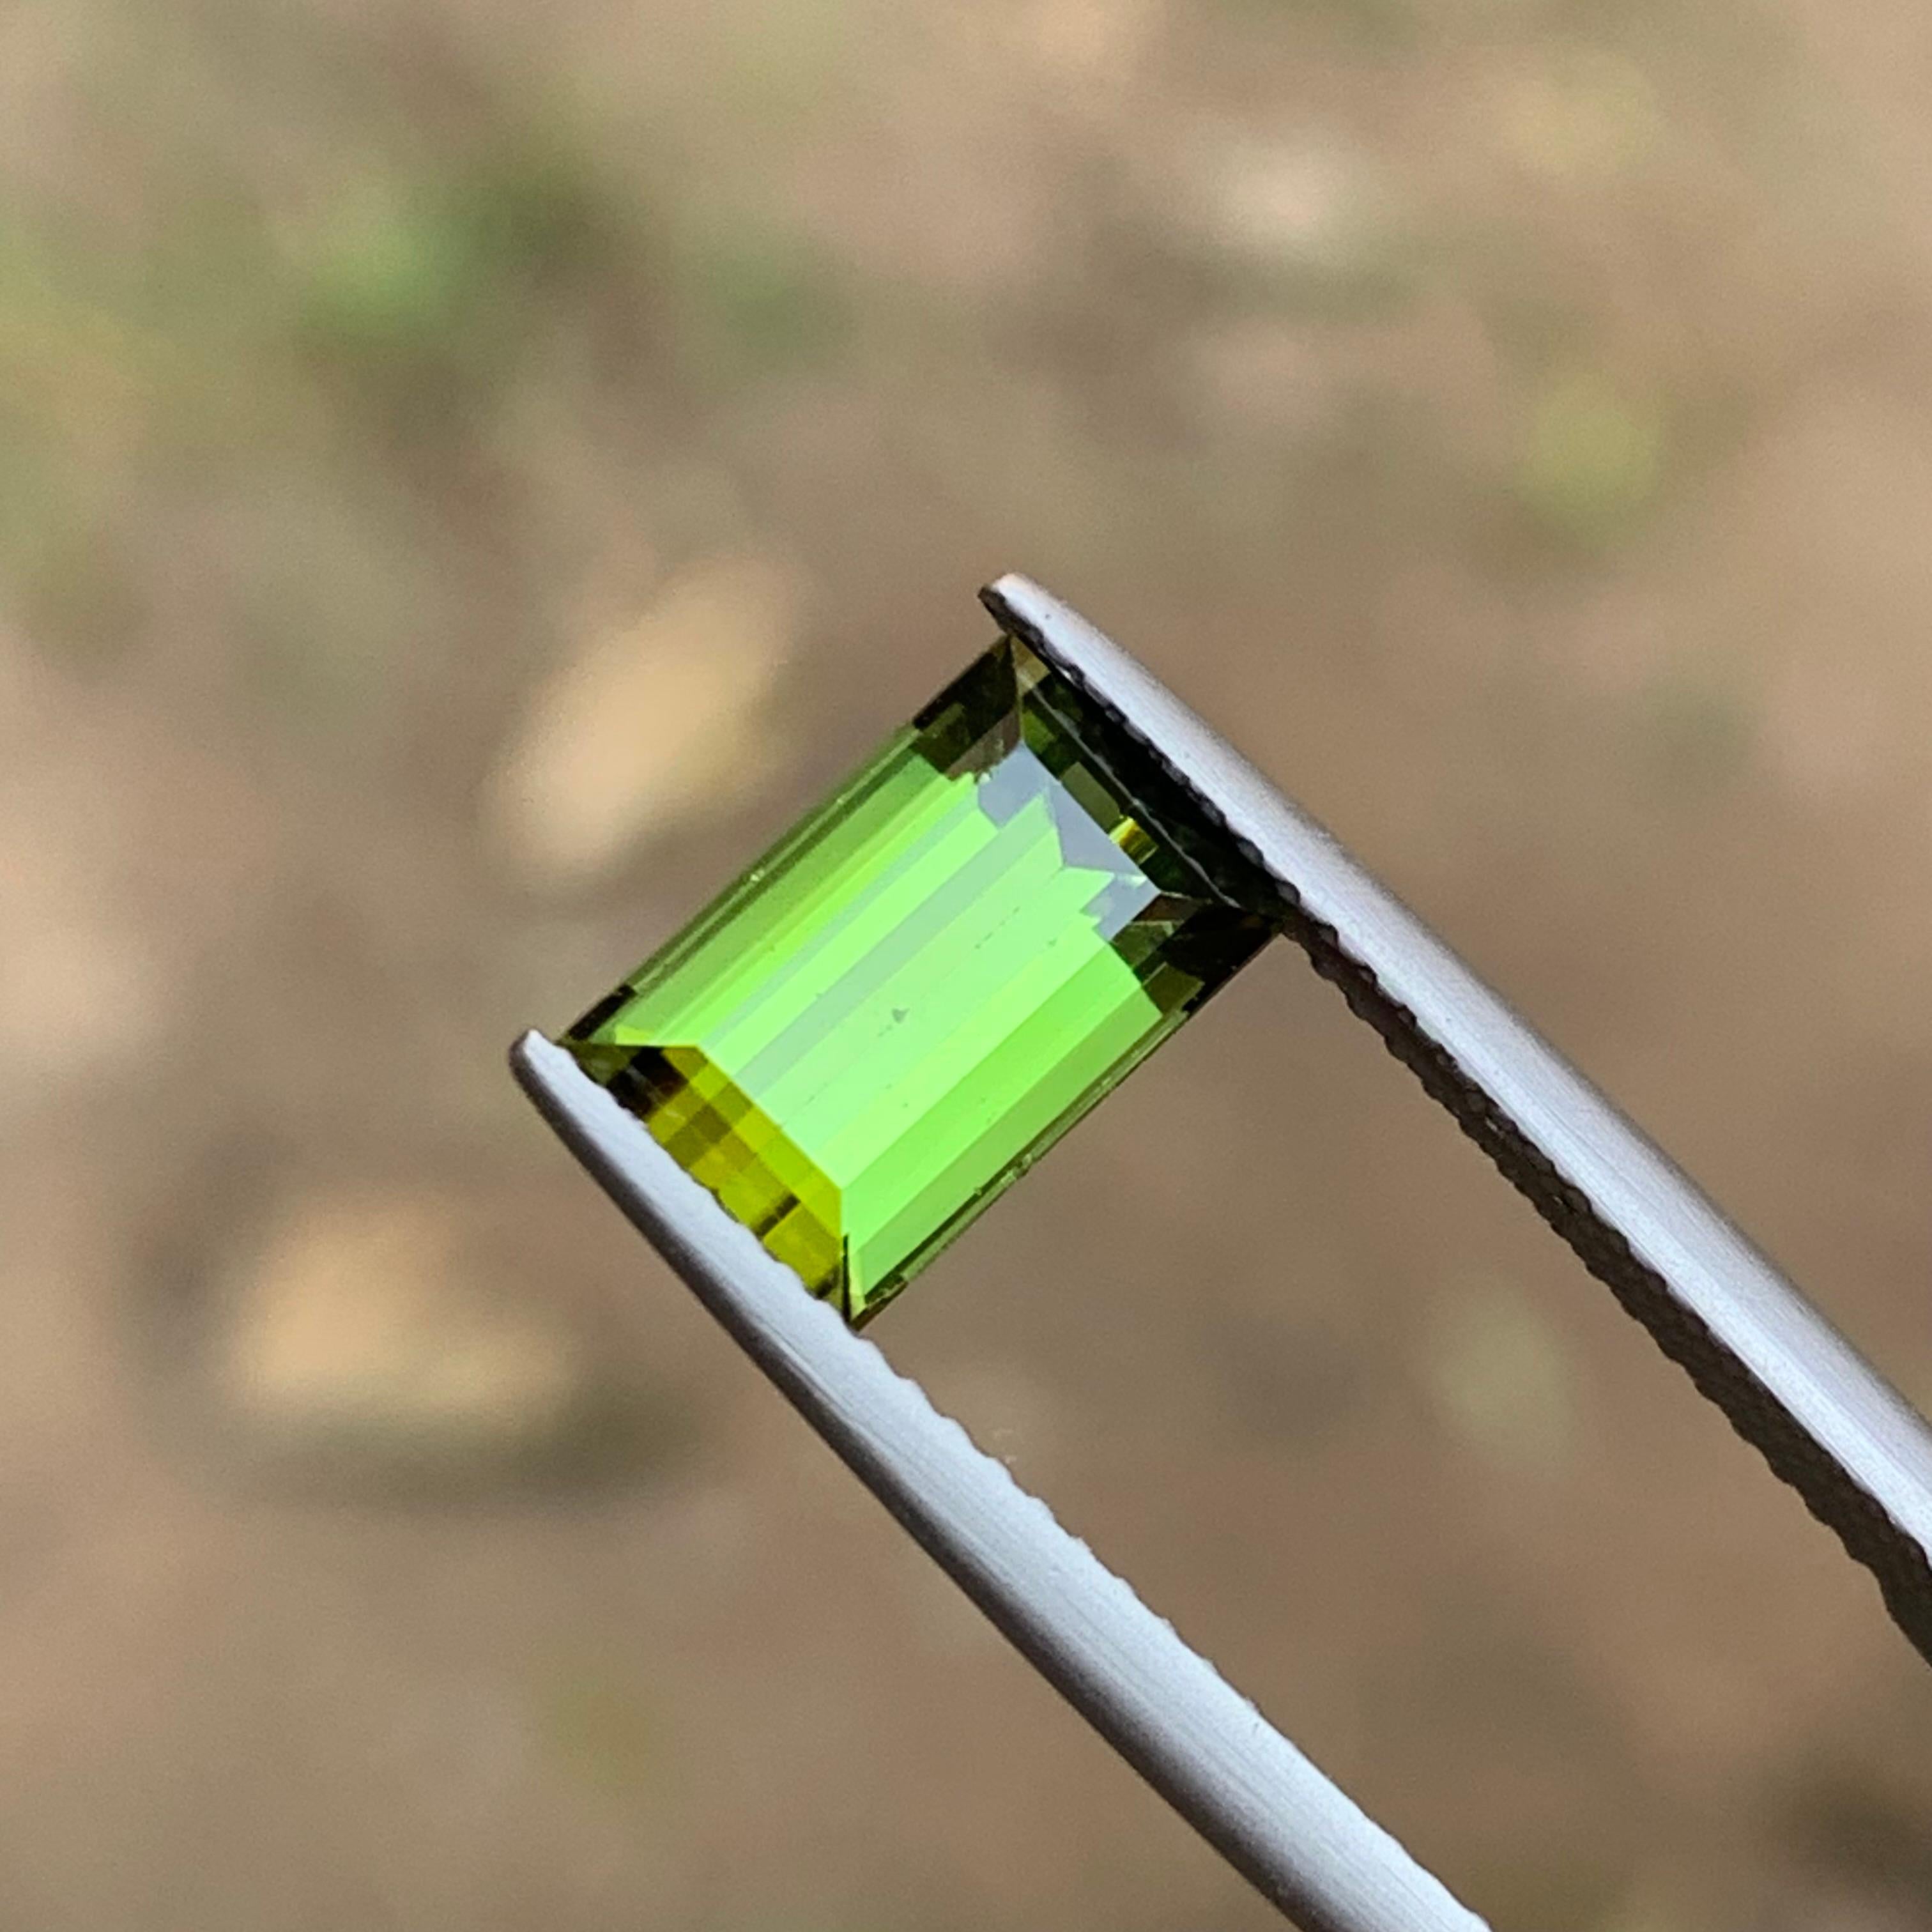 Gorgeous Yellowish Green Baguette Cut Natural Tourmaline Loose Gemstones from Afghanistan! This exquisite Baguette Cut gemstone is a radiant celebration of elegance and sophistication. Mined in the heart of Afghanistan, its mesmerizing